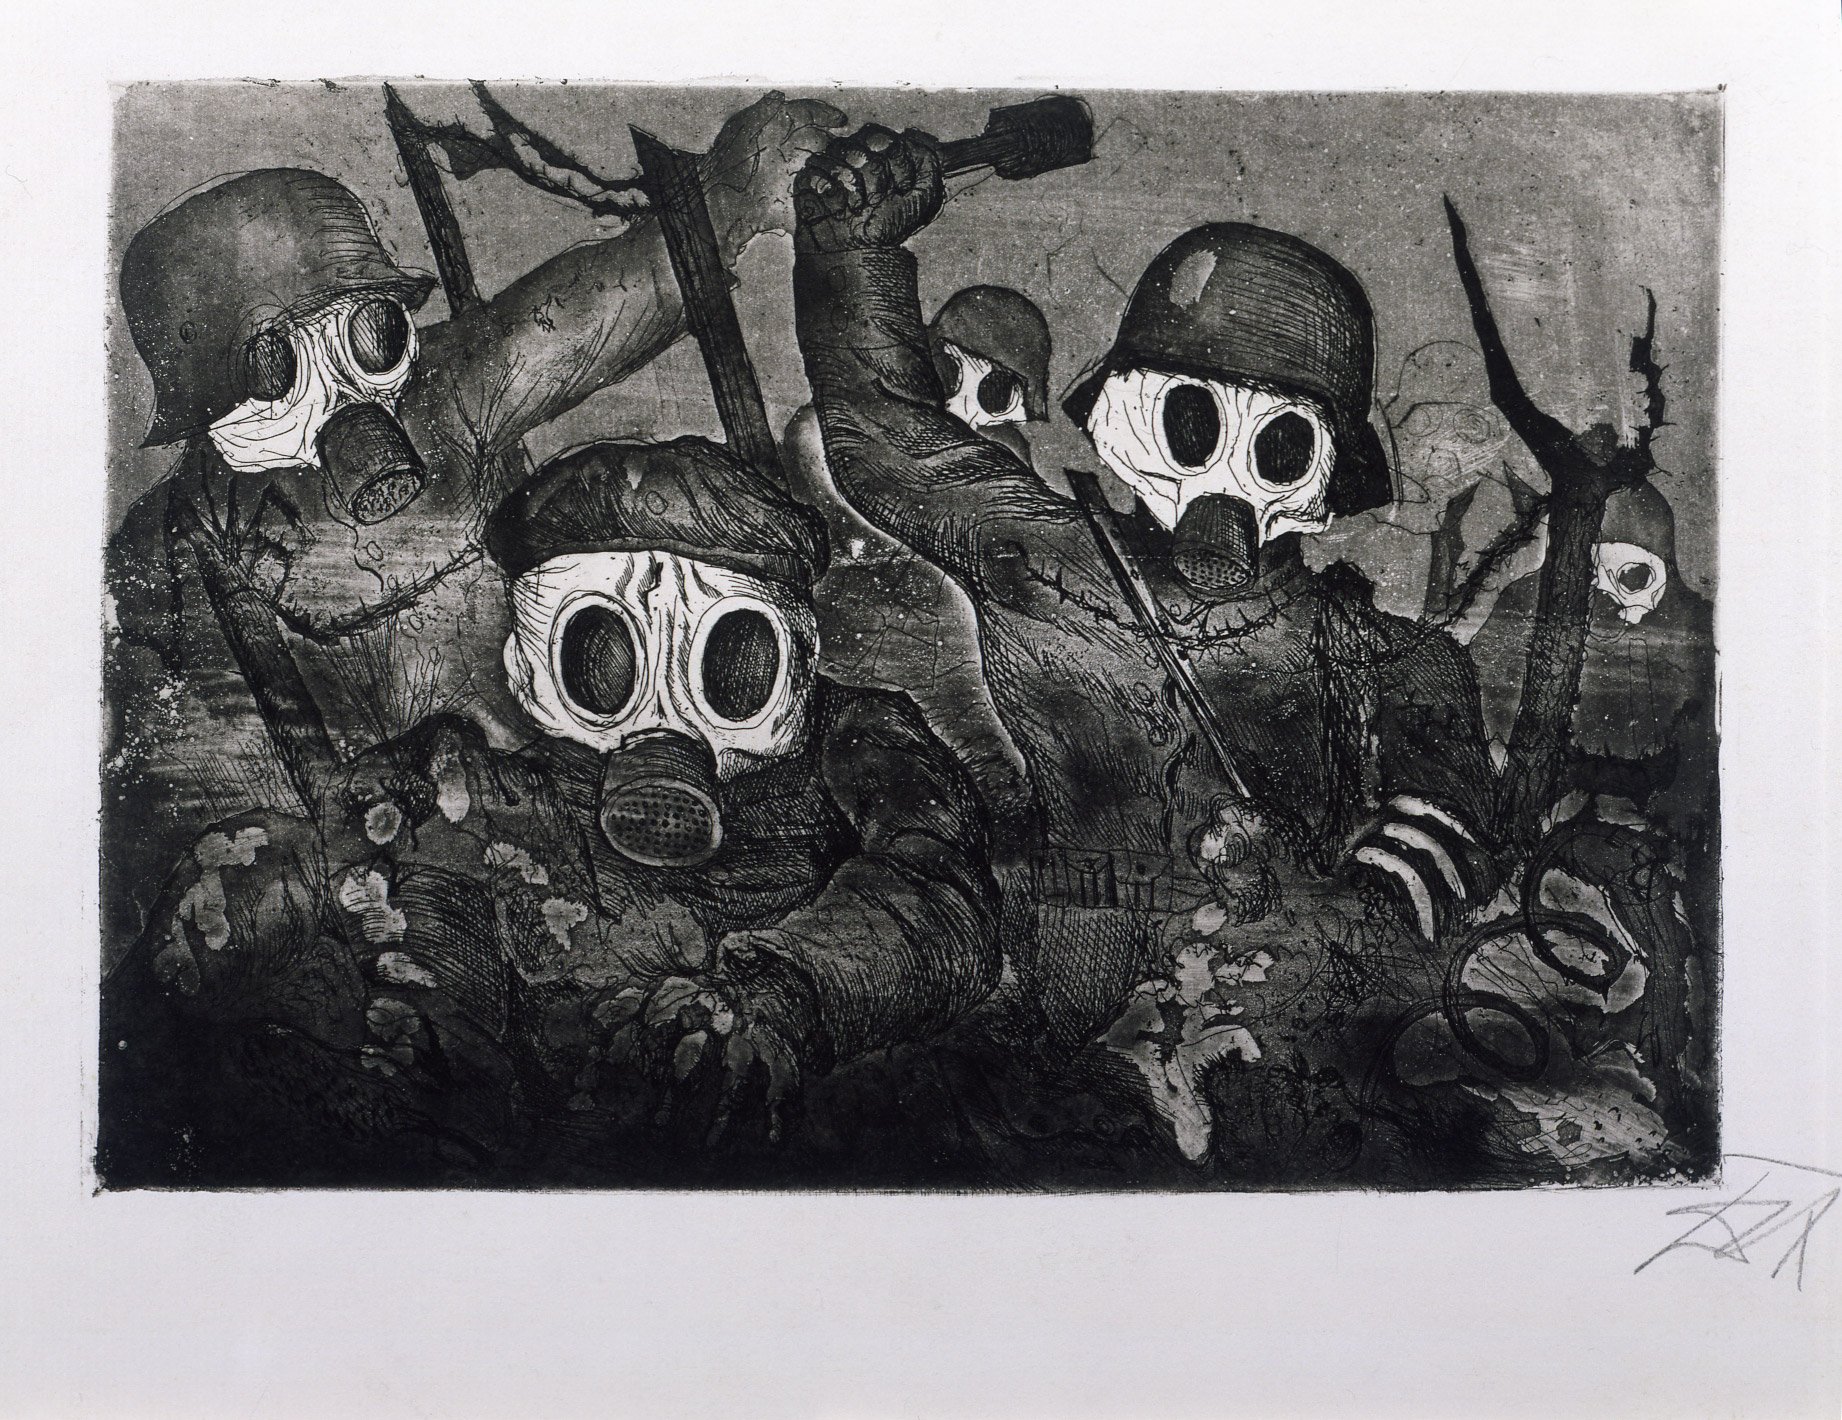   Otto Dix  Germany, 1891–1969  Sturntruppe Geht Unter Gas Vor (Shock Troops Advance Under Gas) , 1924 etching with aquatint and drypoint, 7 1/2 x 11 1/4 inches Gift of David and Eva Bradford, 2016.36.2 